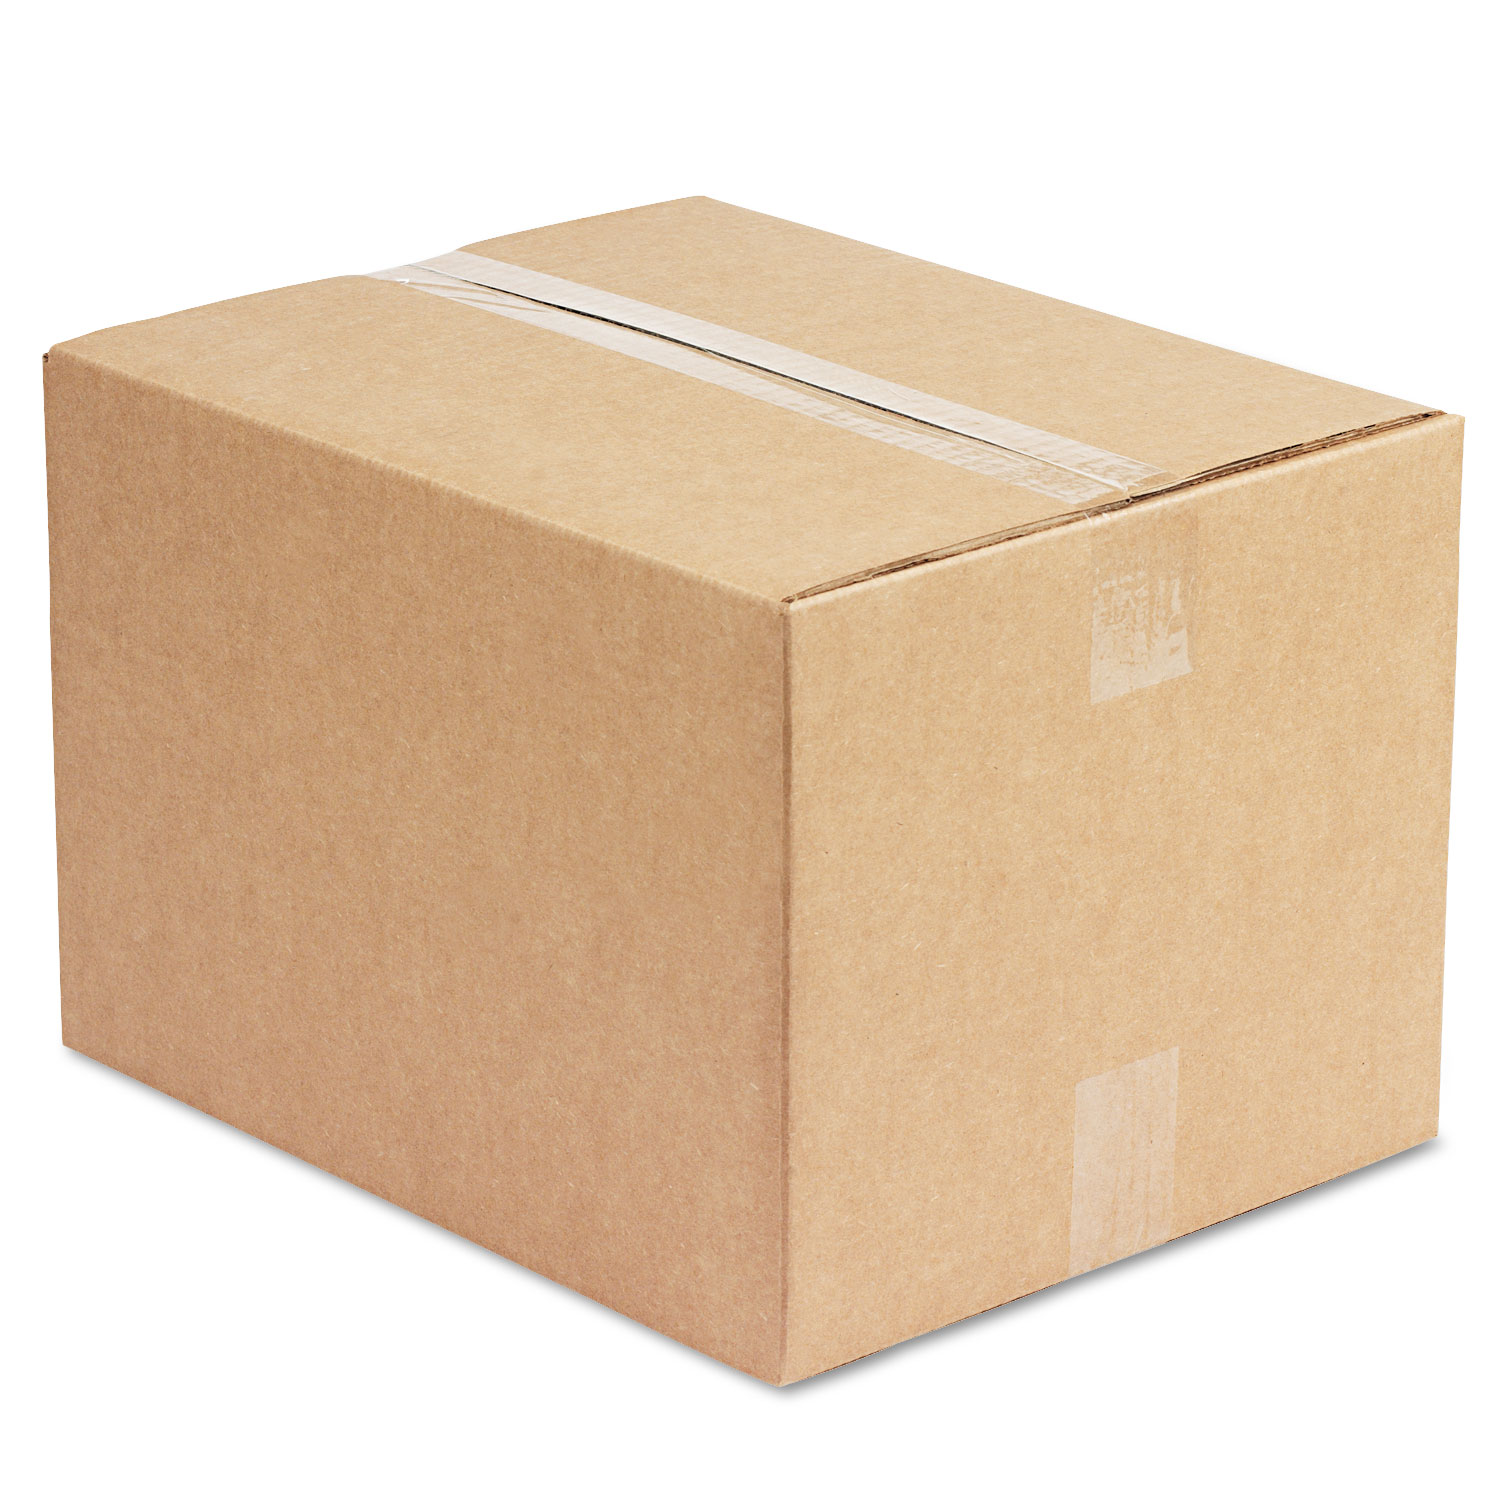 Fixed-Depth Shipping Boxes, Regular Slotted Container (RSC), 15